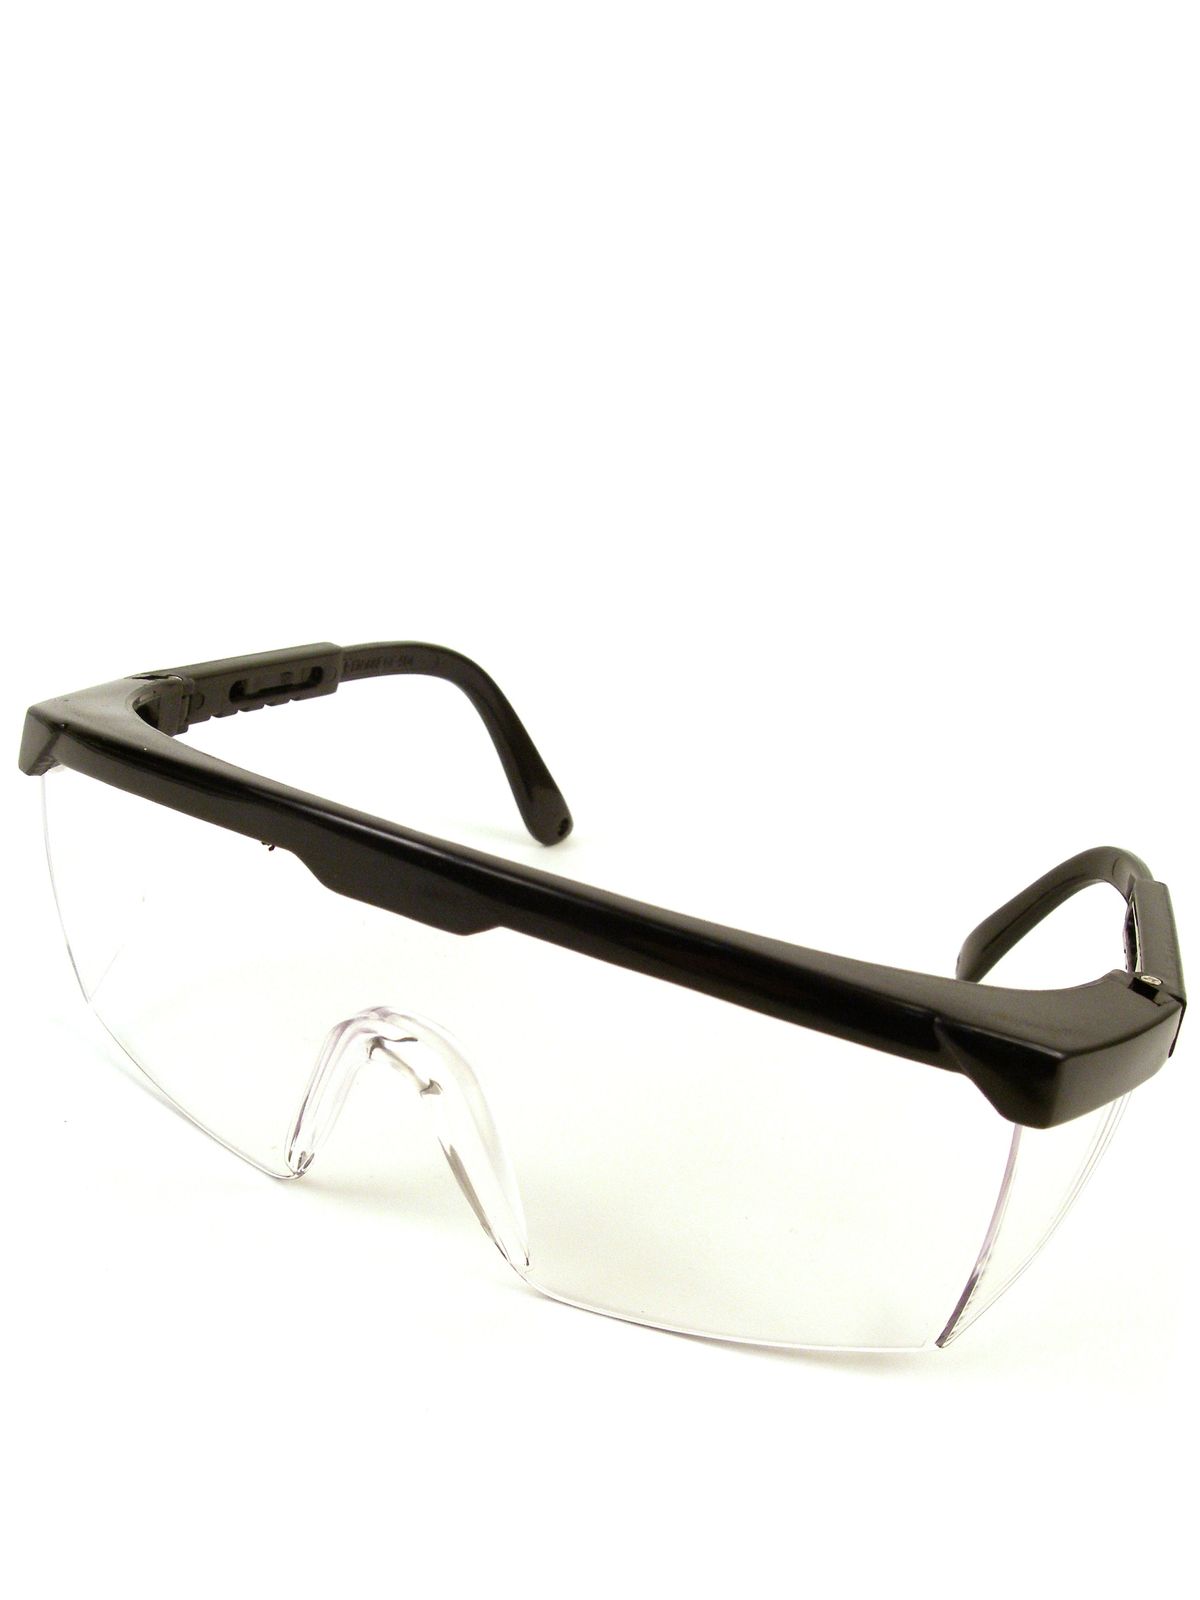 Fireworks Clear Safety Glasses Safety Glasses